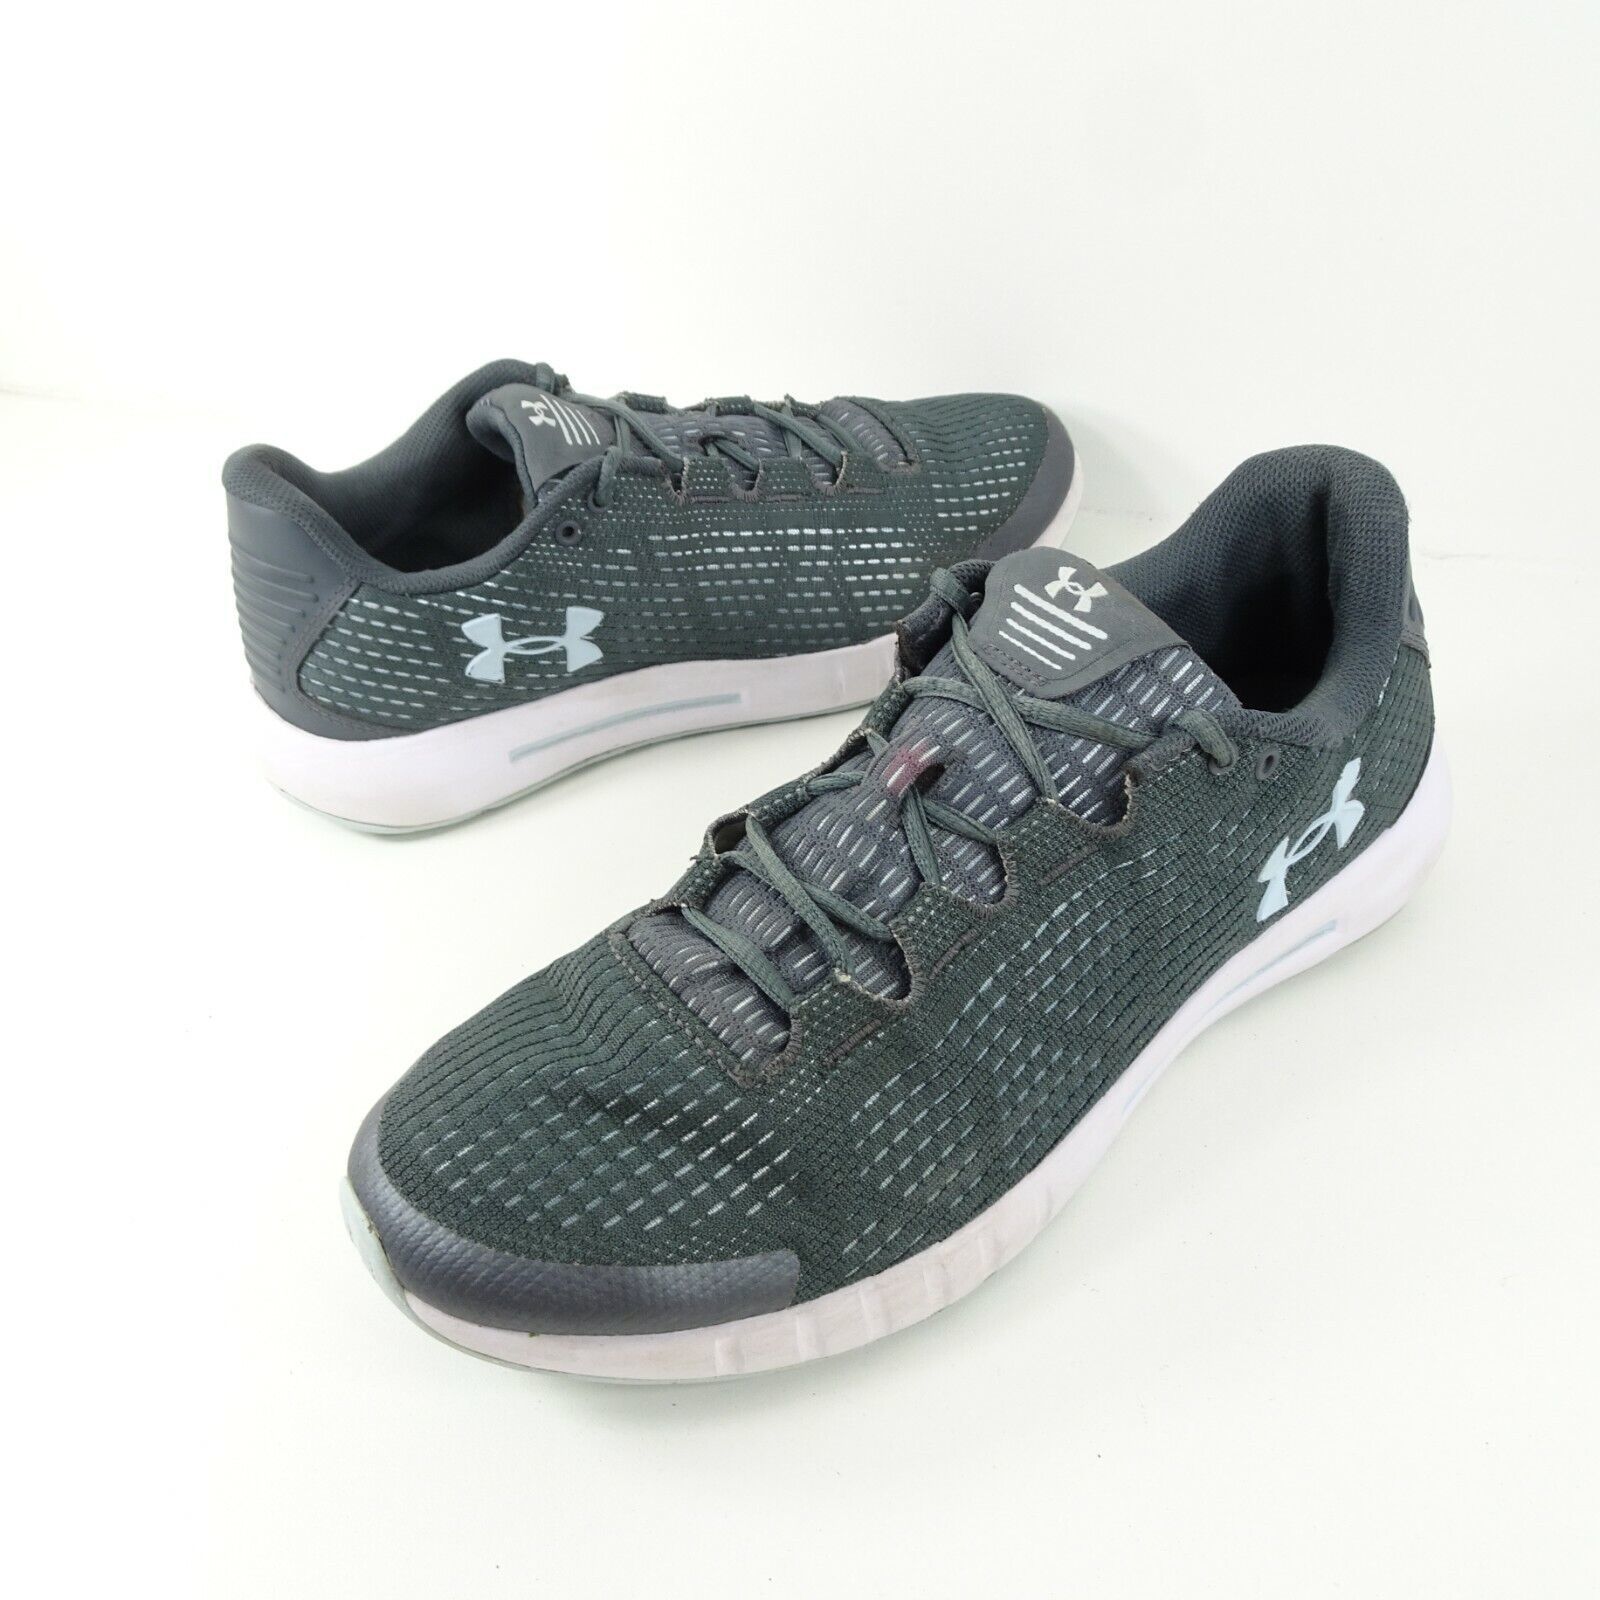 Primary image for Under Armour Micro G Pursuit SE Women's Size 9.5 Gray Blue Running Shoes